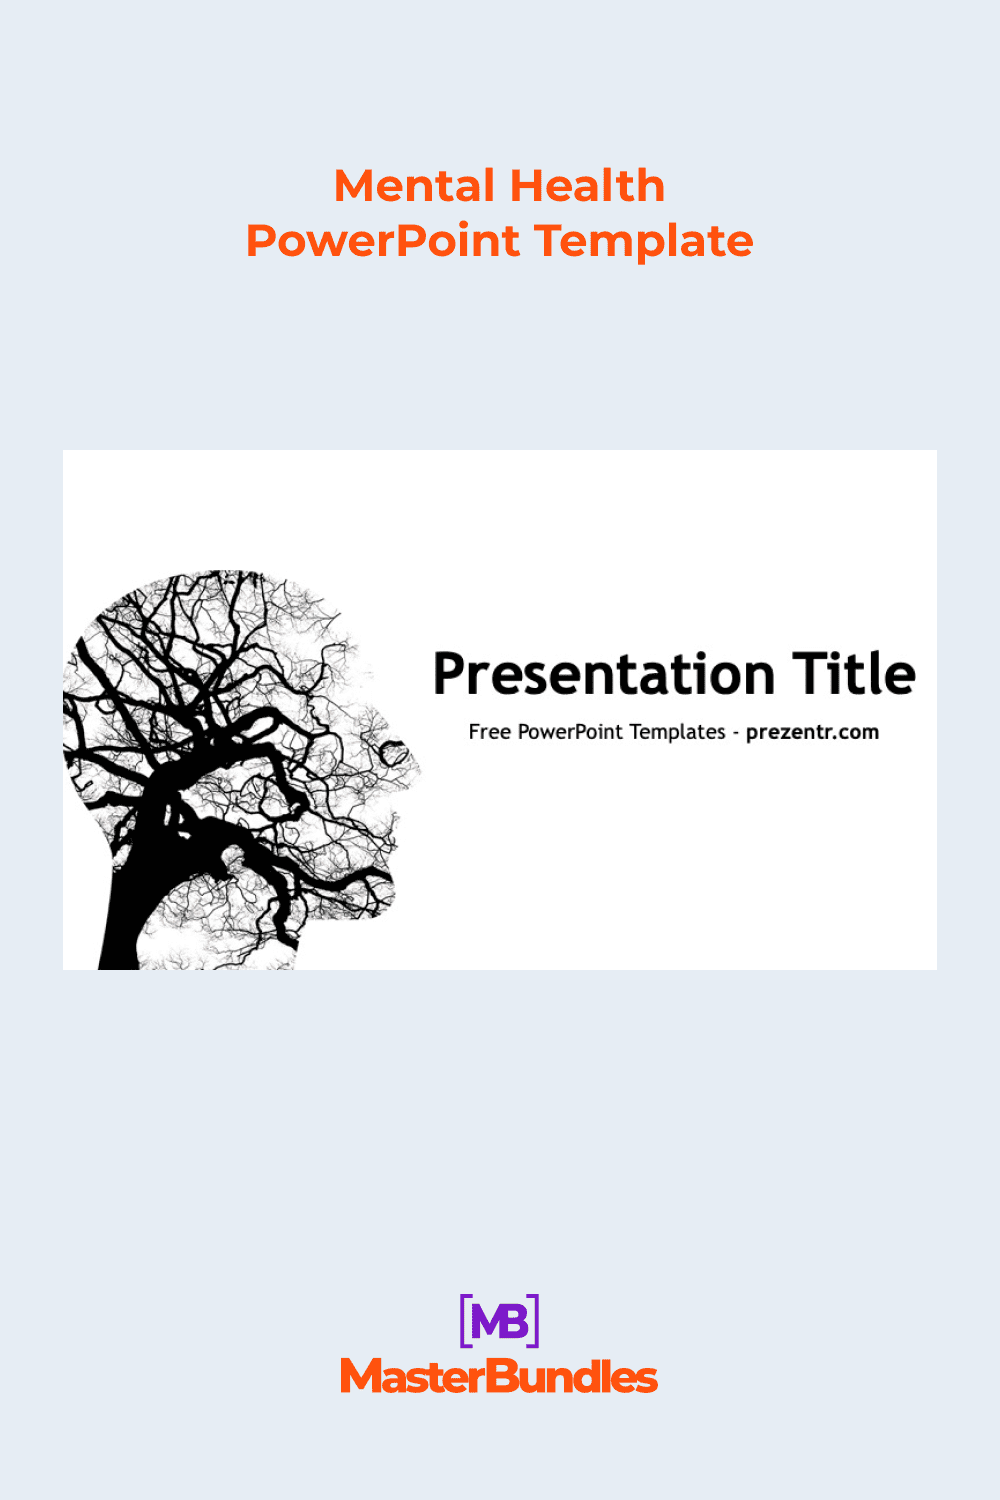 Mental health powerpoint template.